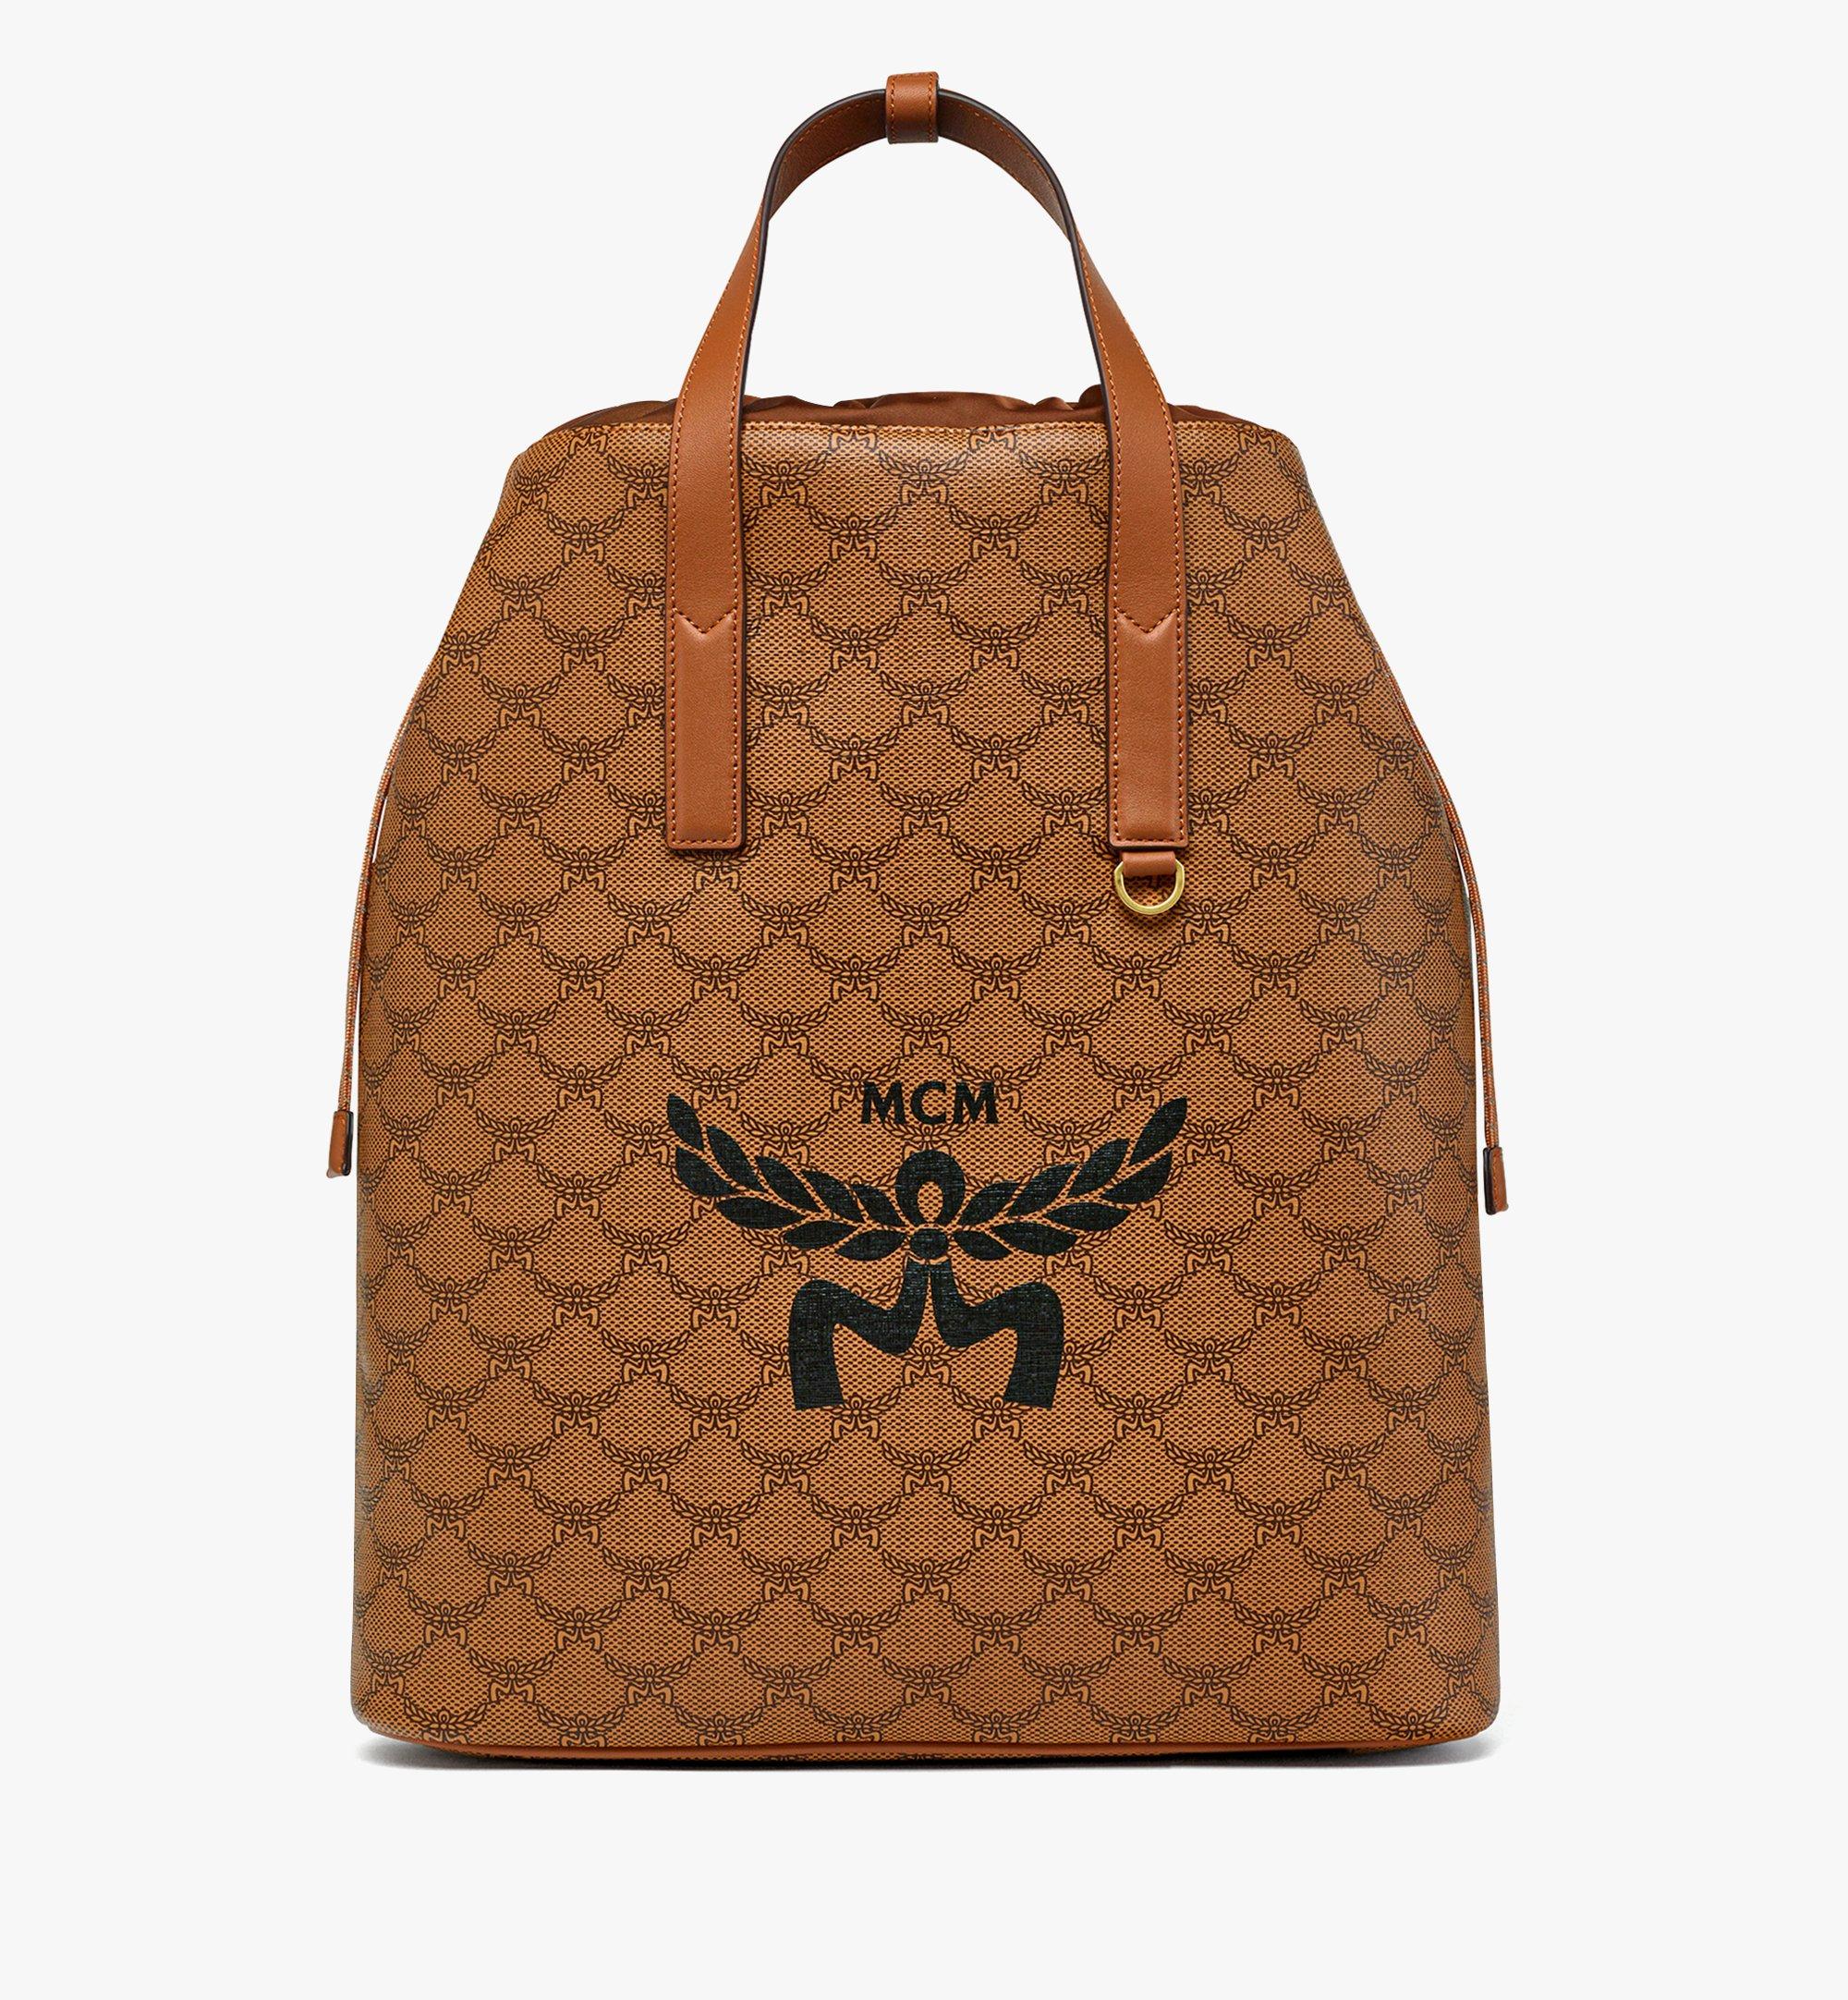 Brand New Mcm Bags They're Real With The Price Tag Still On